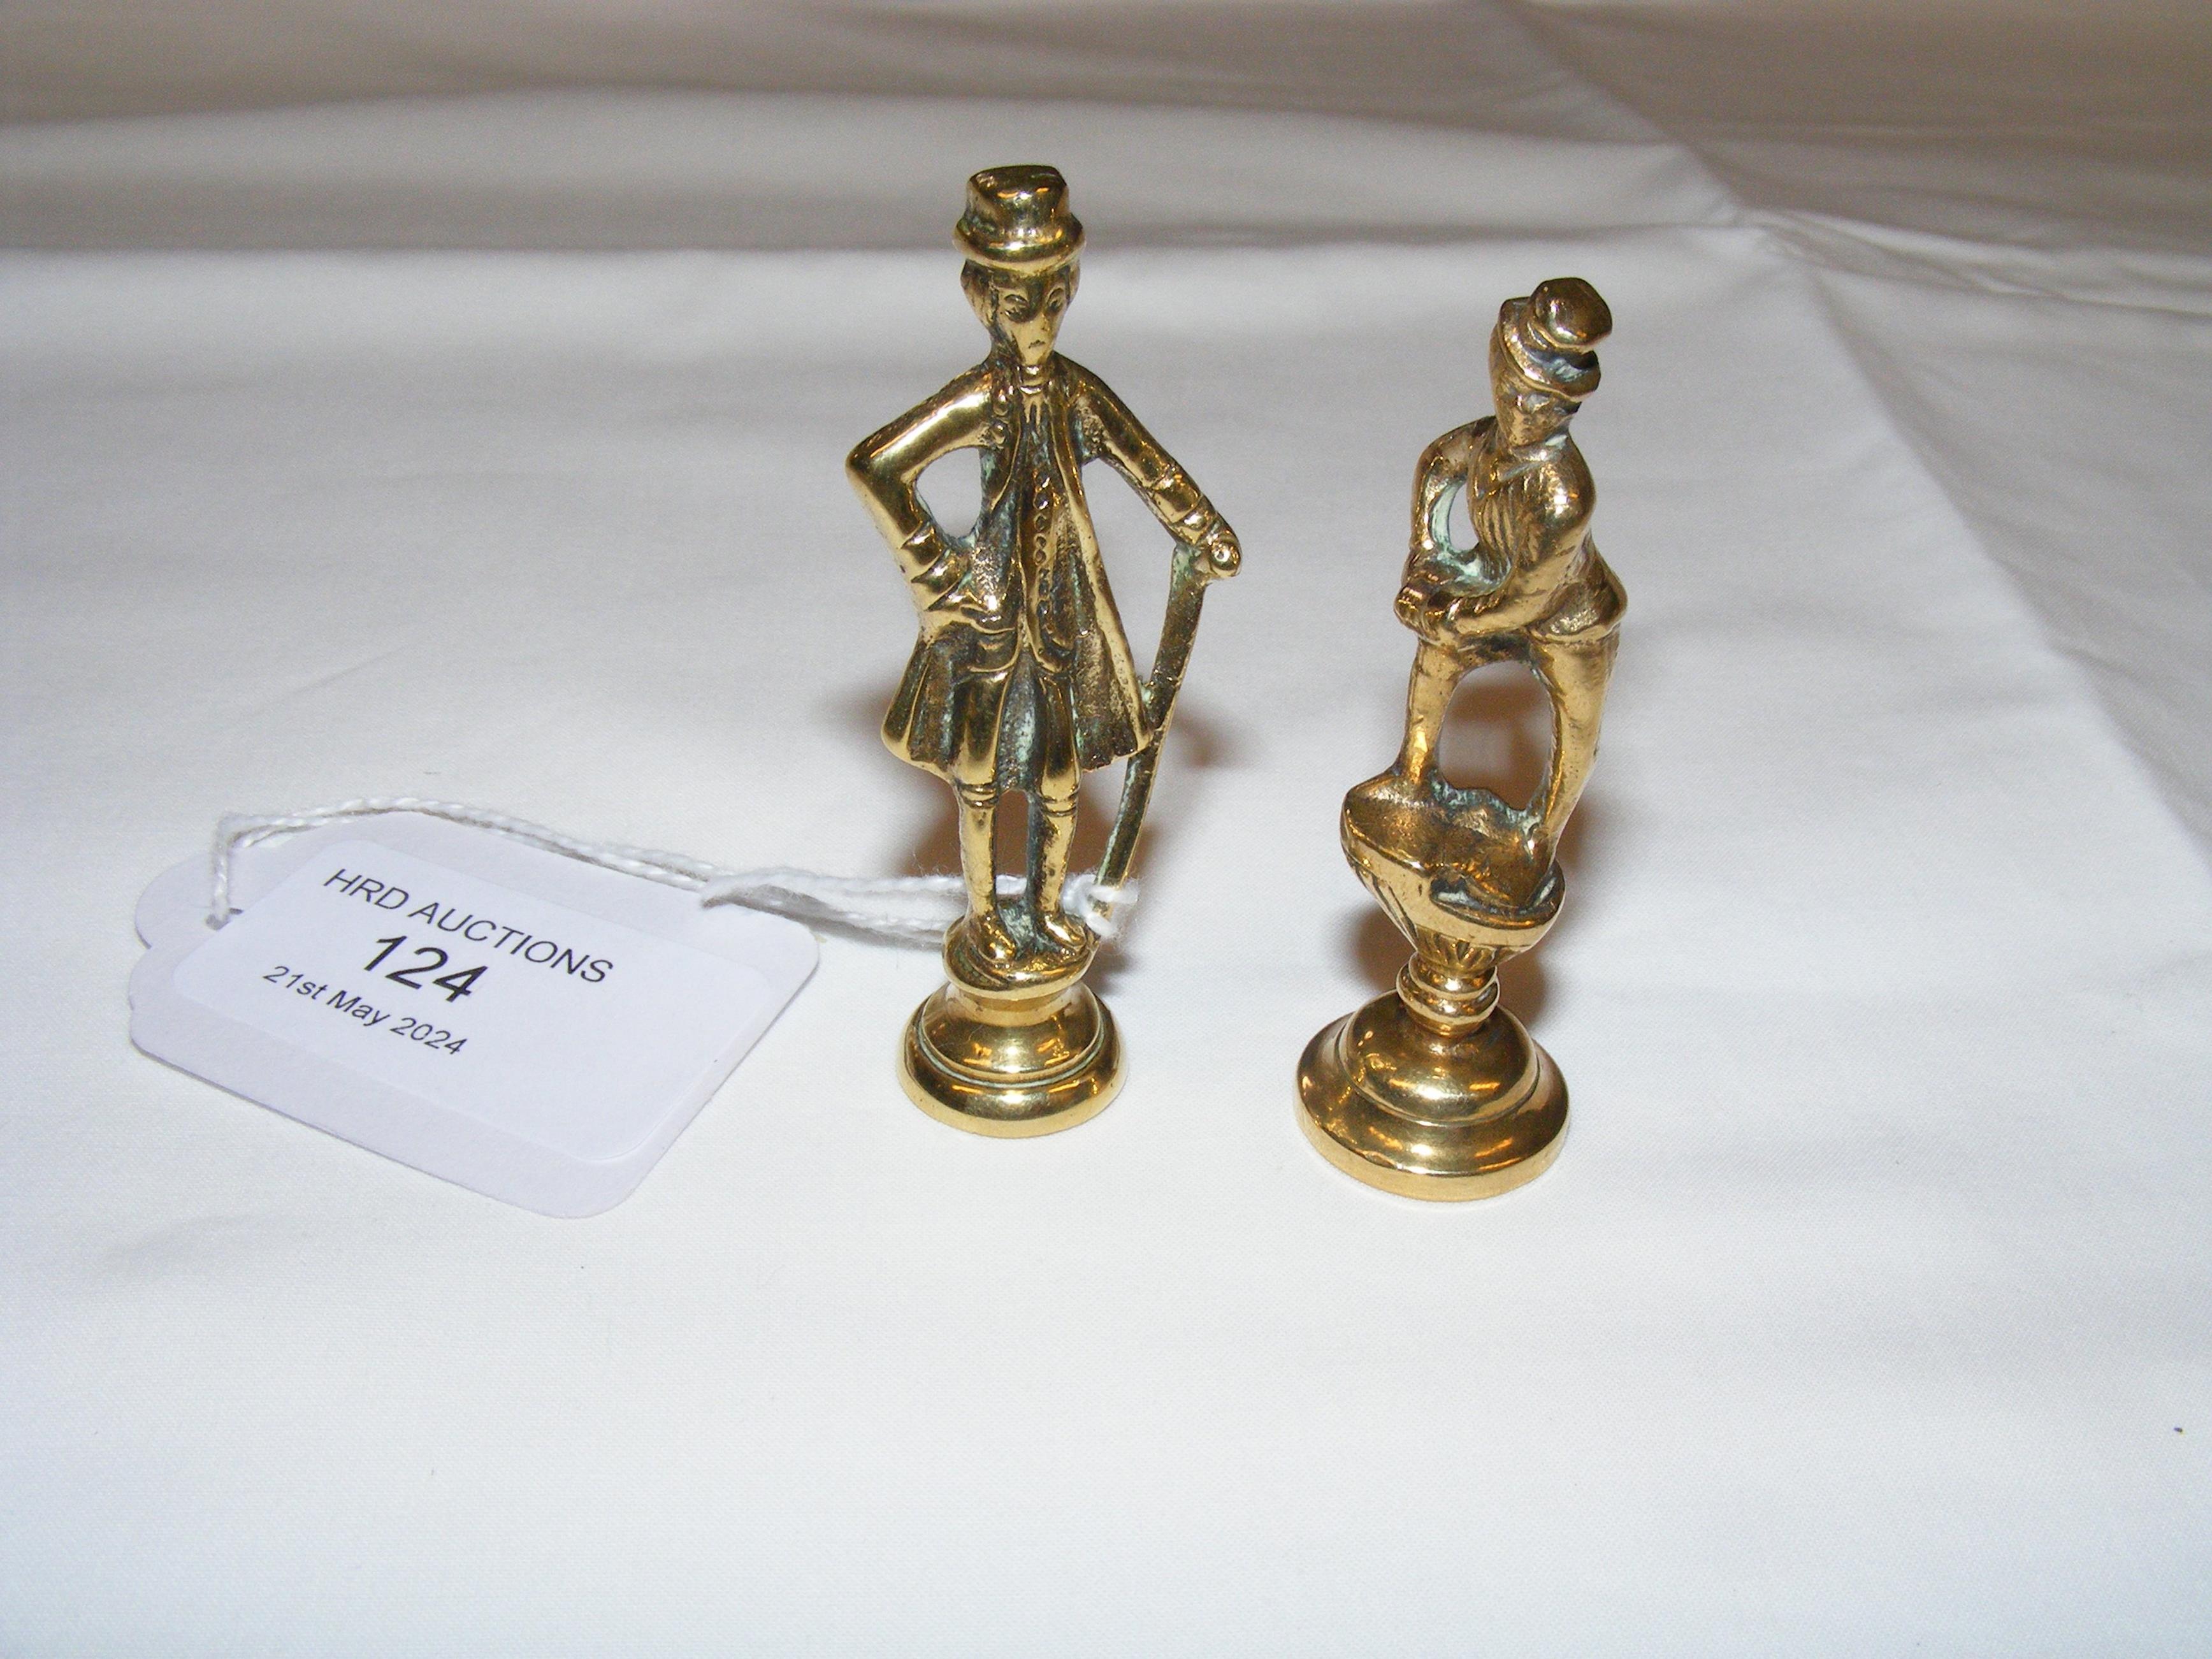 A pair of 5.5cm high brass pipe tampers - Fagin an